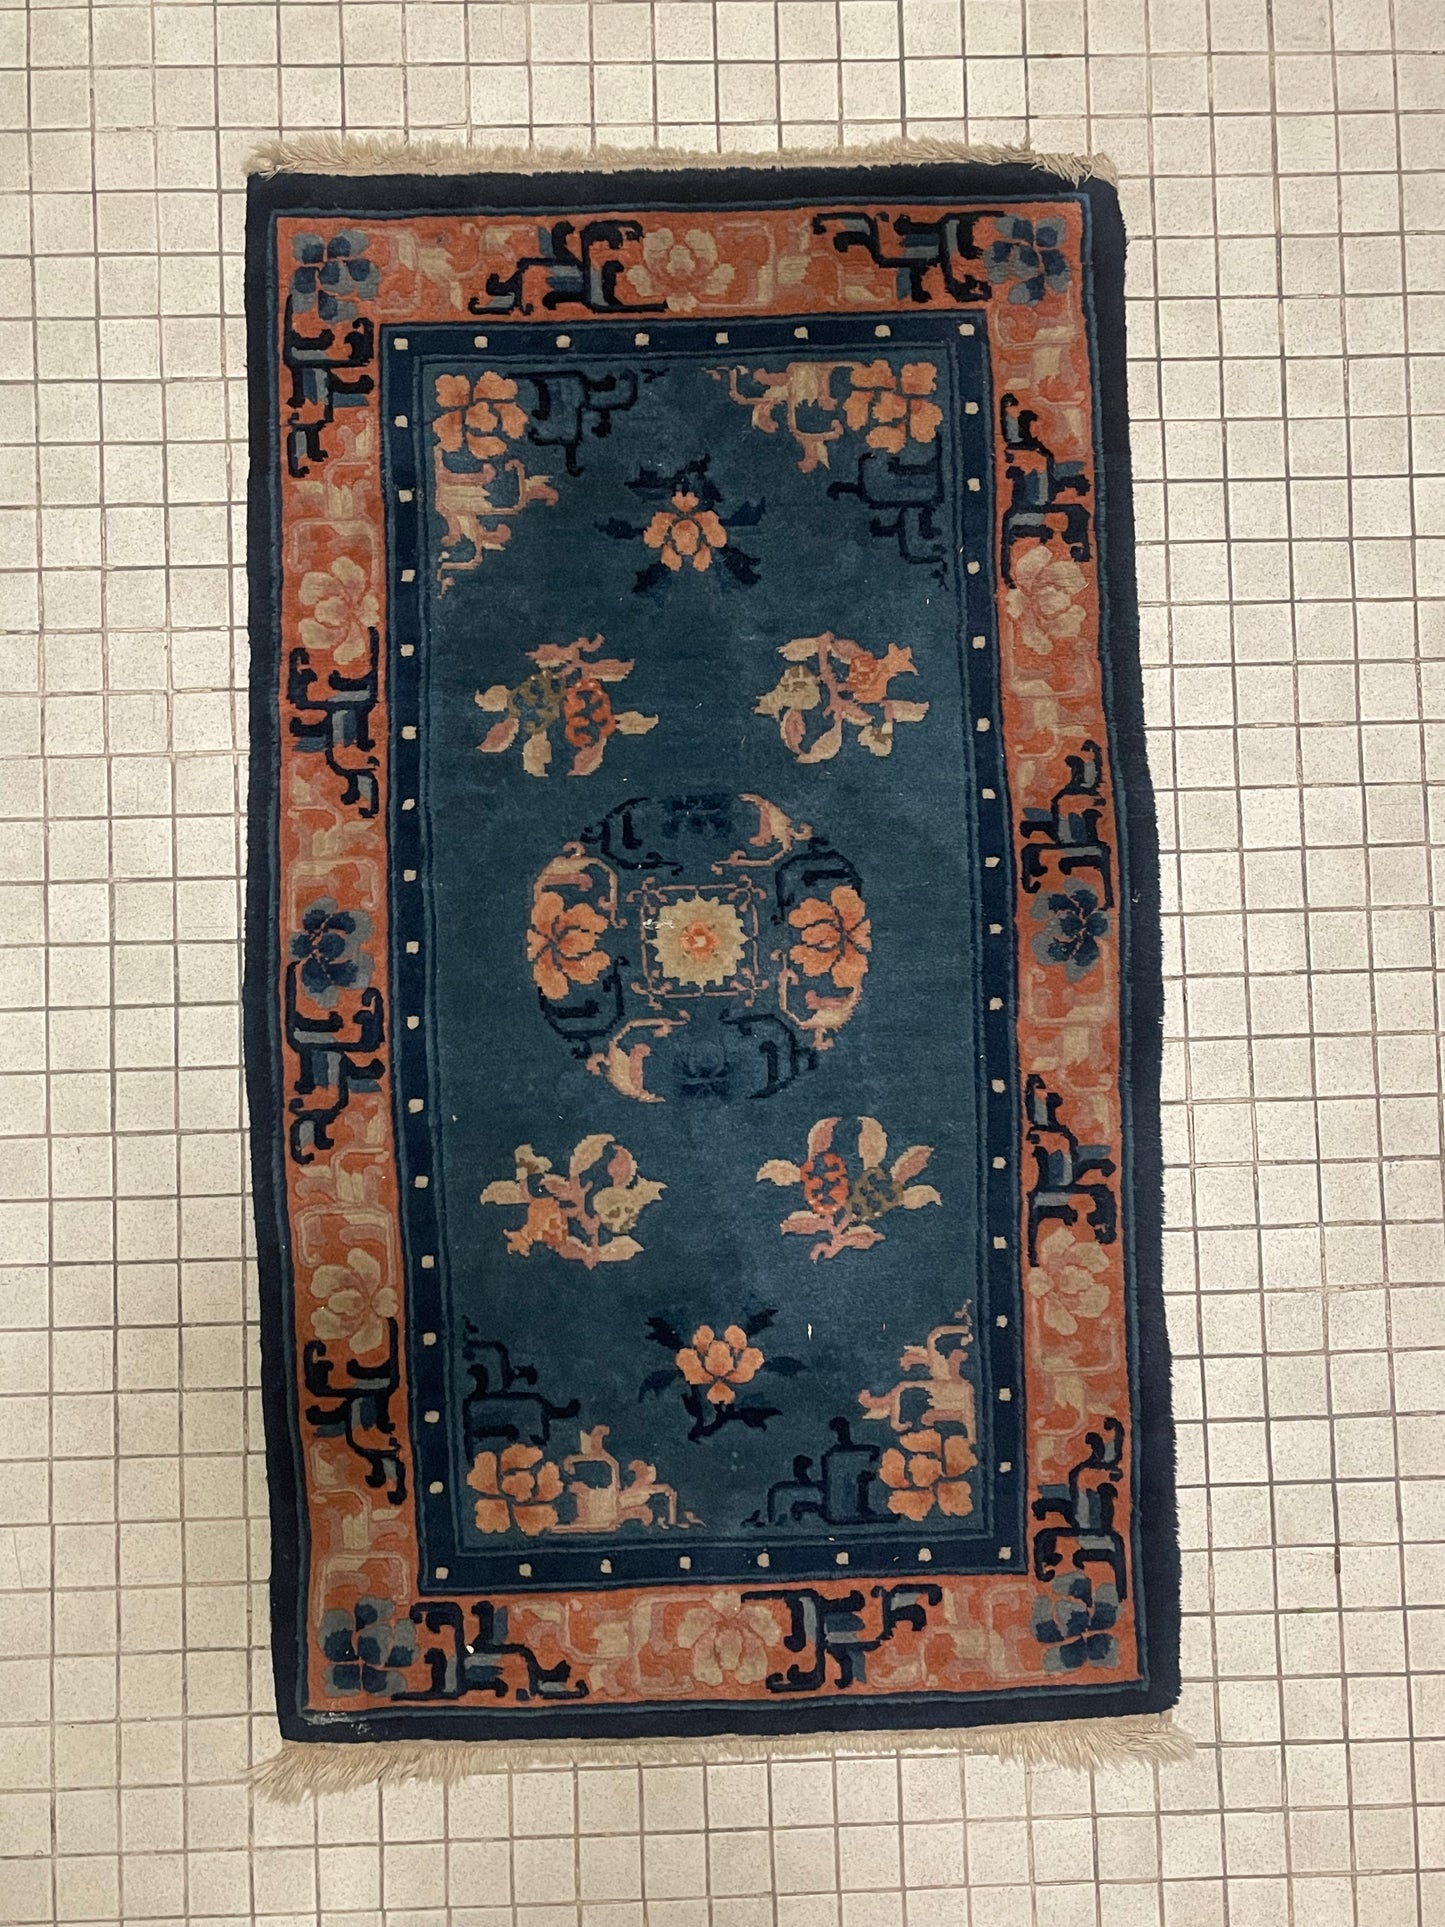 A vintage Chinese art-deco rug